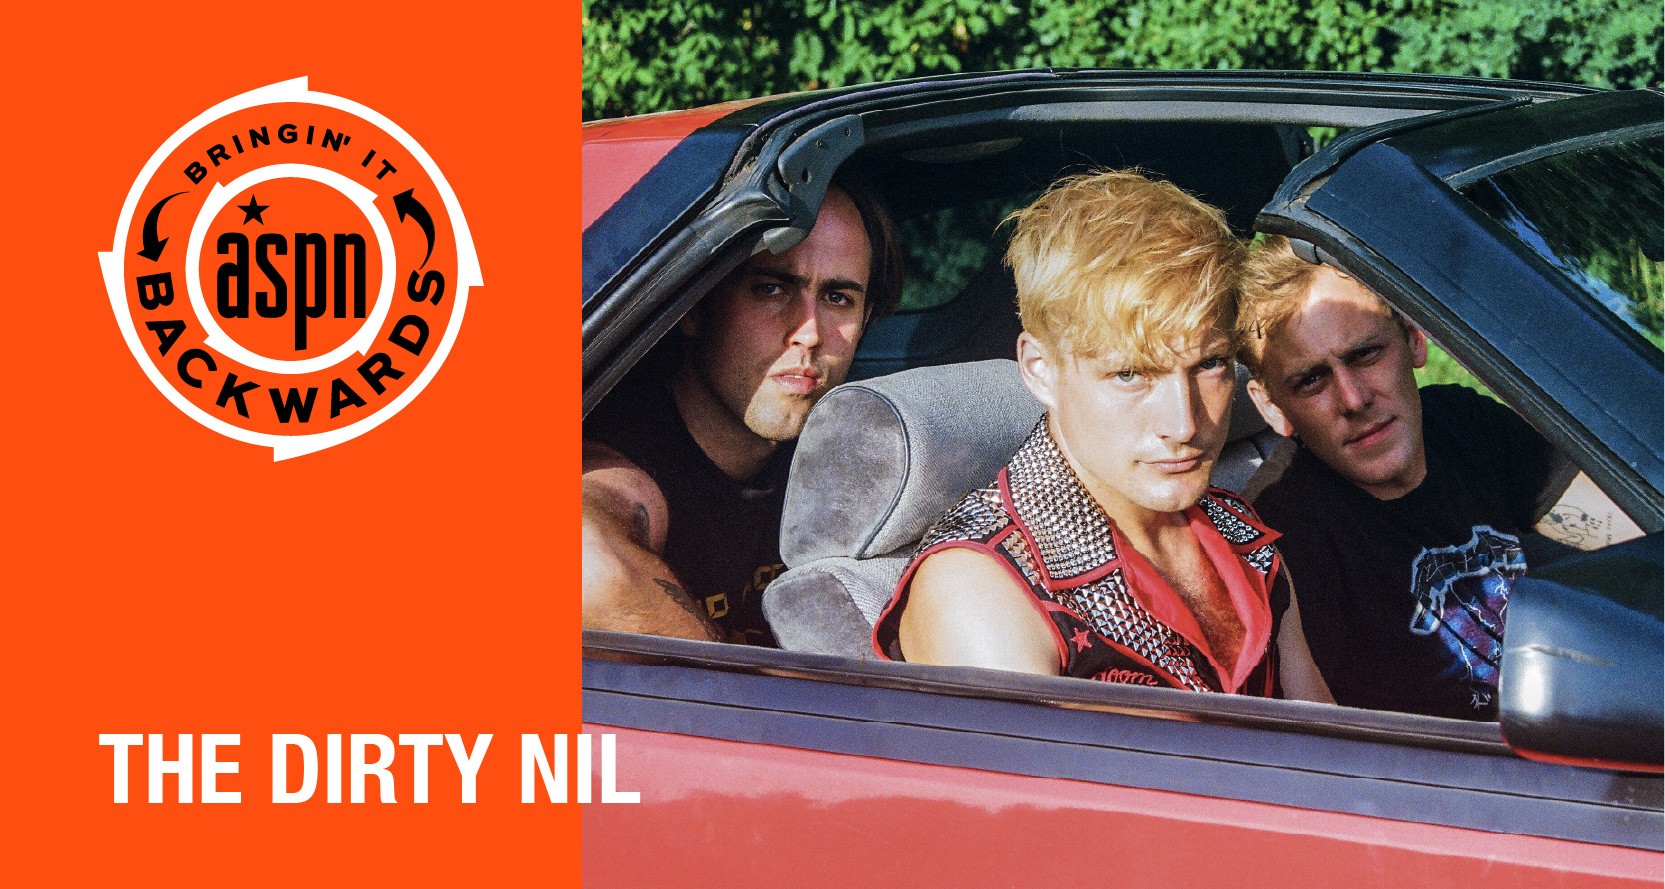 Bringin’ it Backwards: Interview with The Dirty Nil